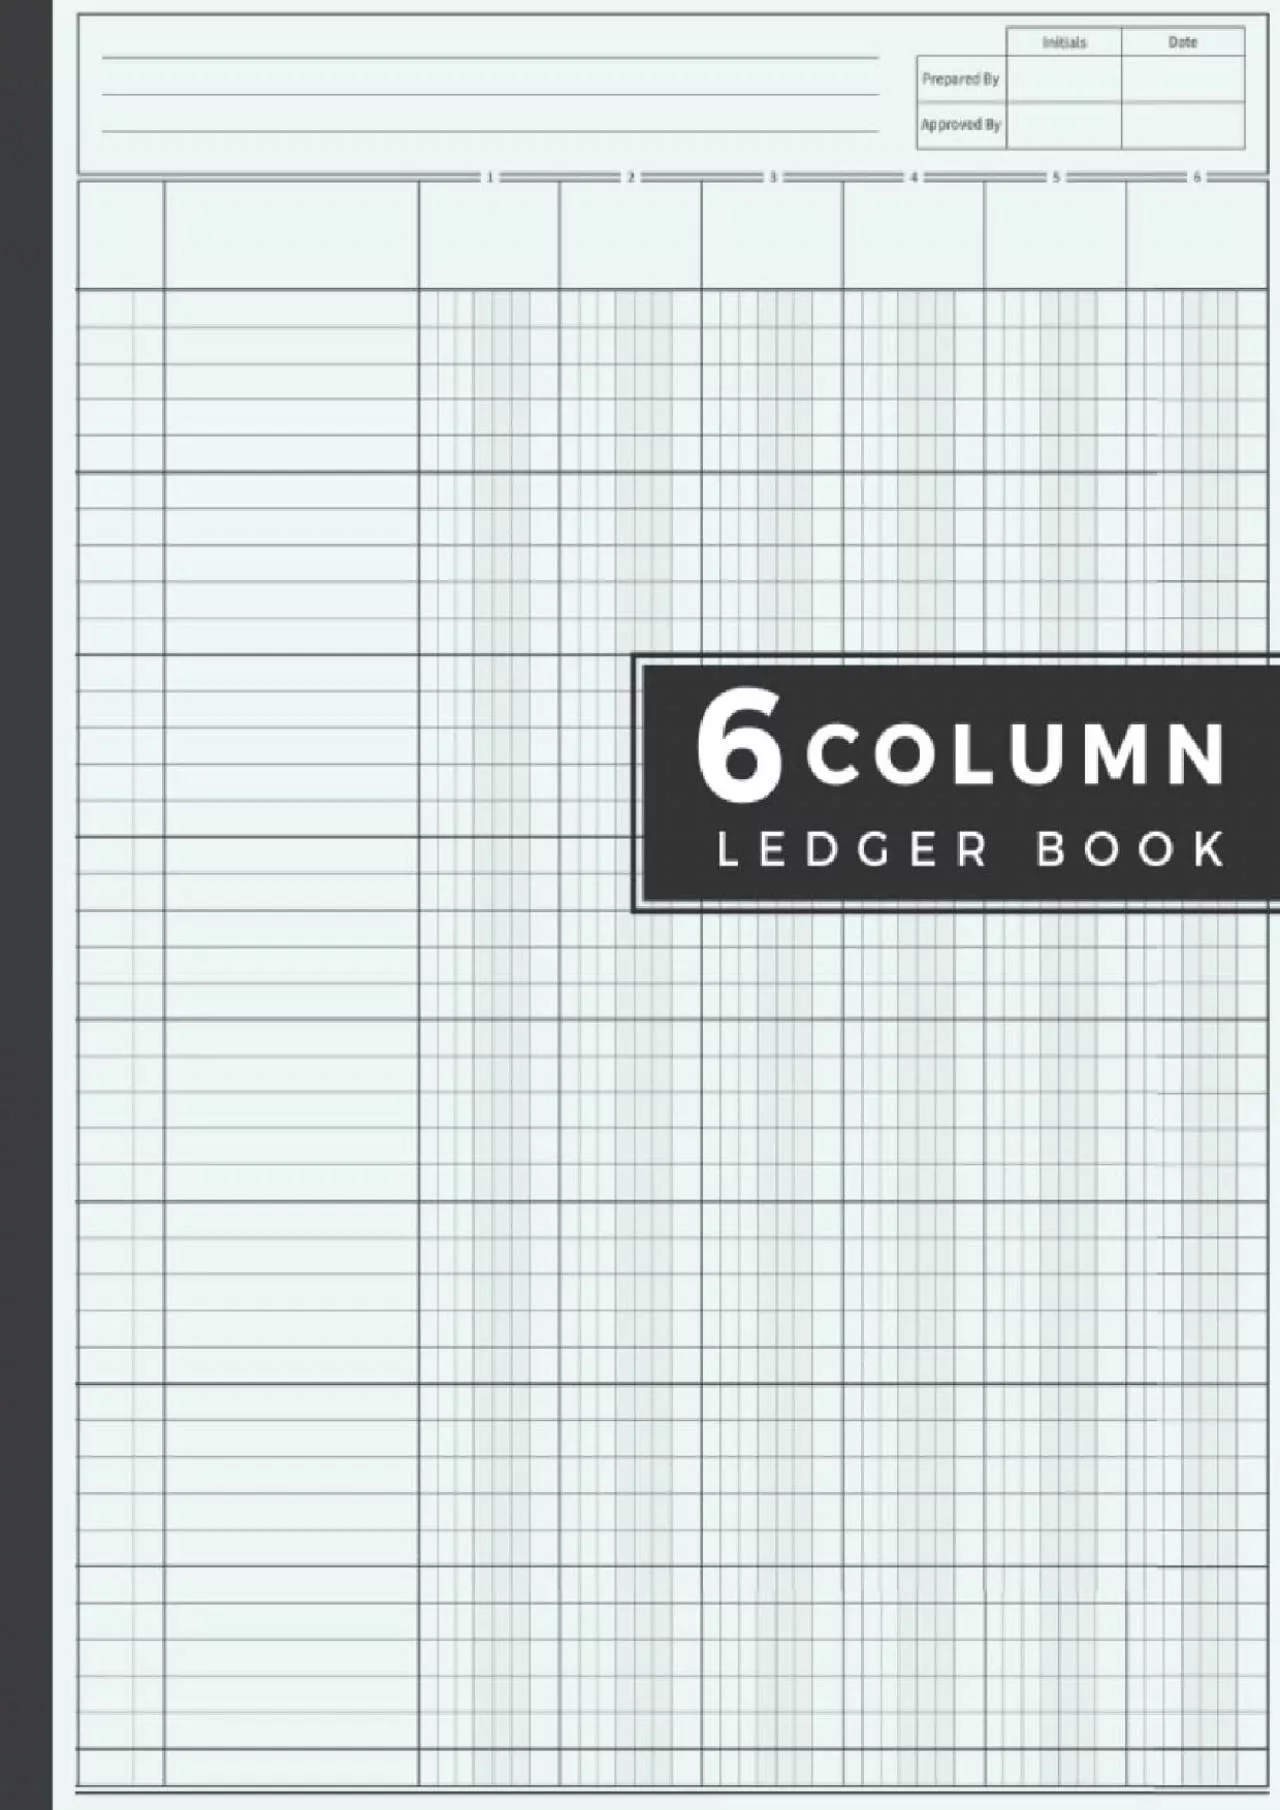 6 Column Ledger Book: Accounting Ledger Book for Bookkeeping | Account Journal 110 Pages